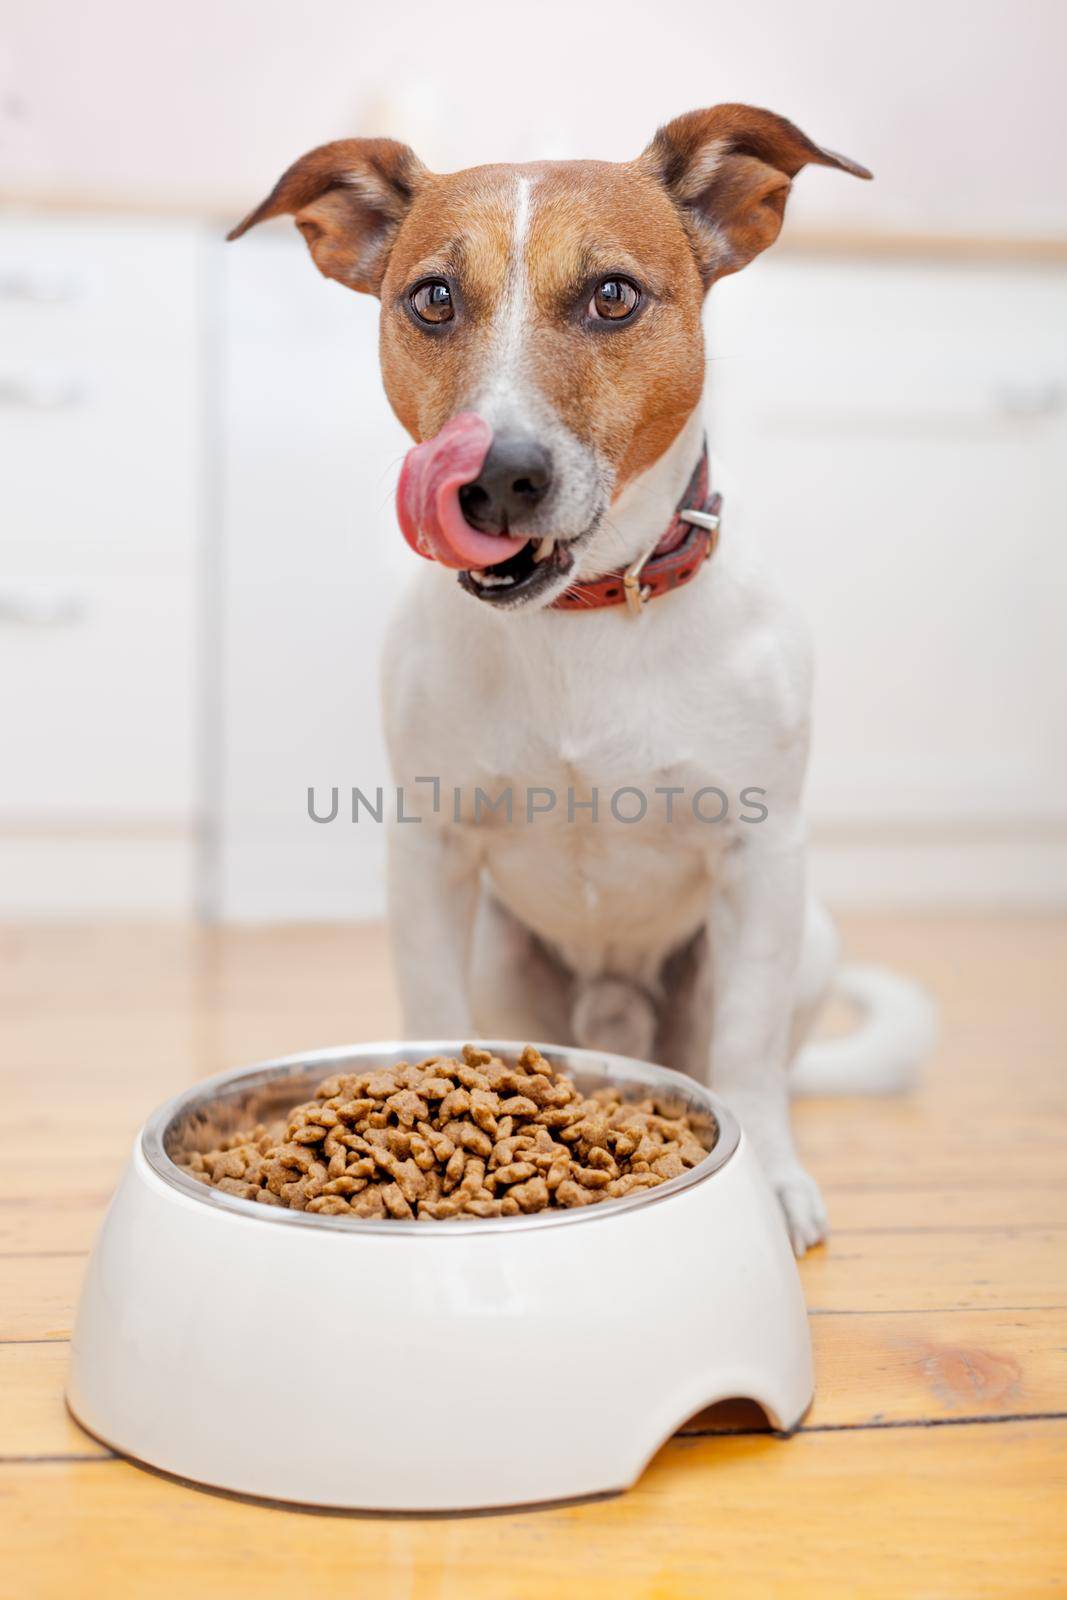 hungry dog eating and licking with tongue